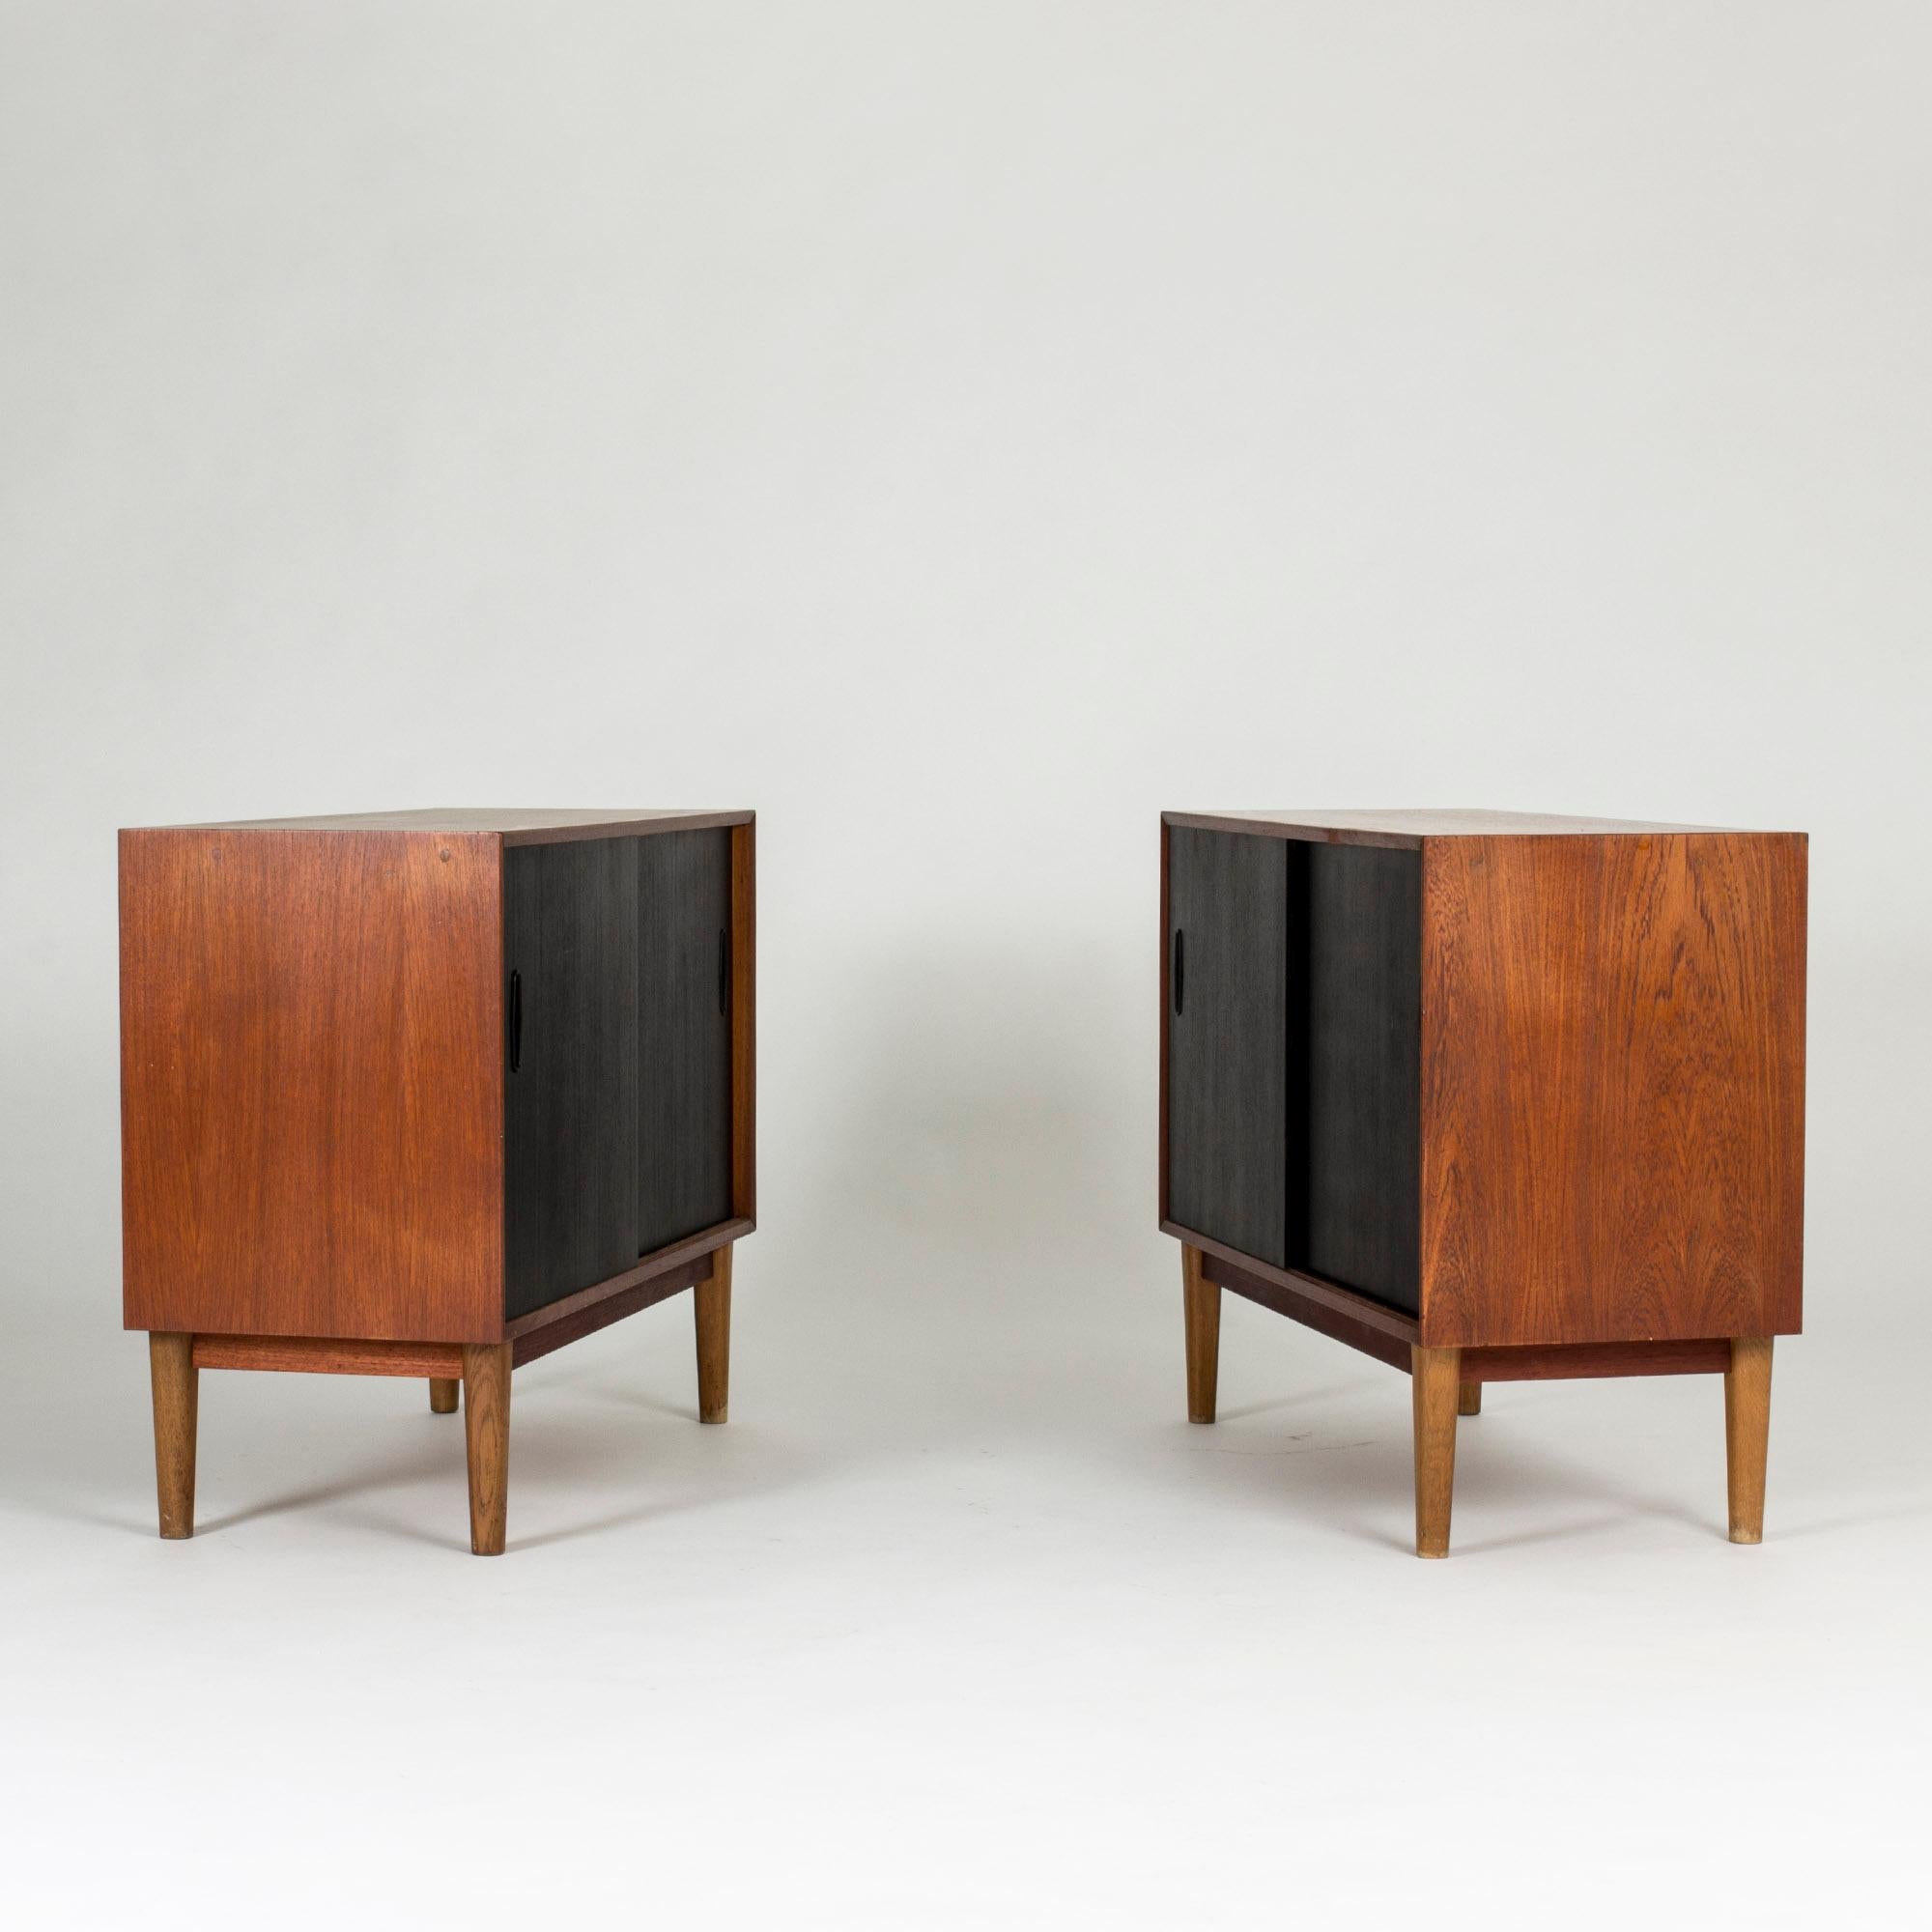 Pair of cool Swedish 1950s sideboards, made from teak with black lacquered front doors.